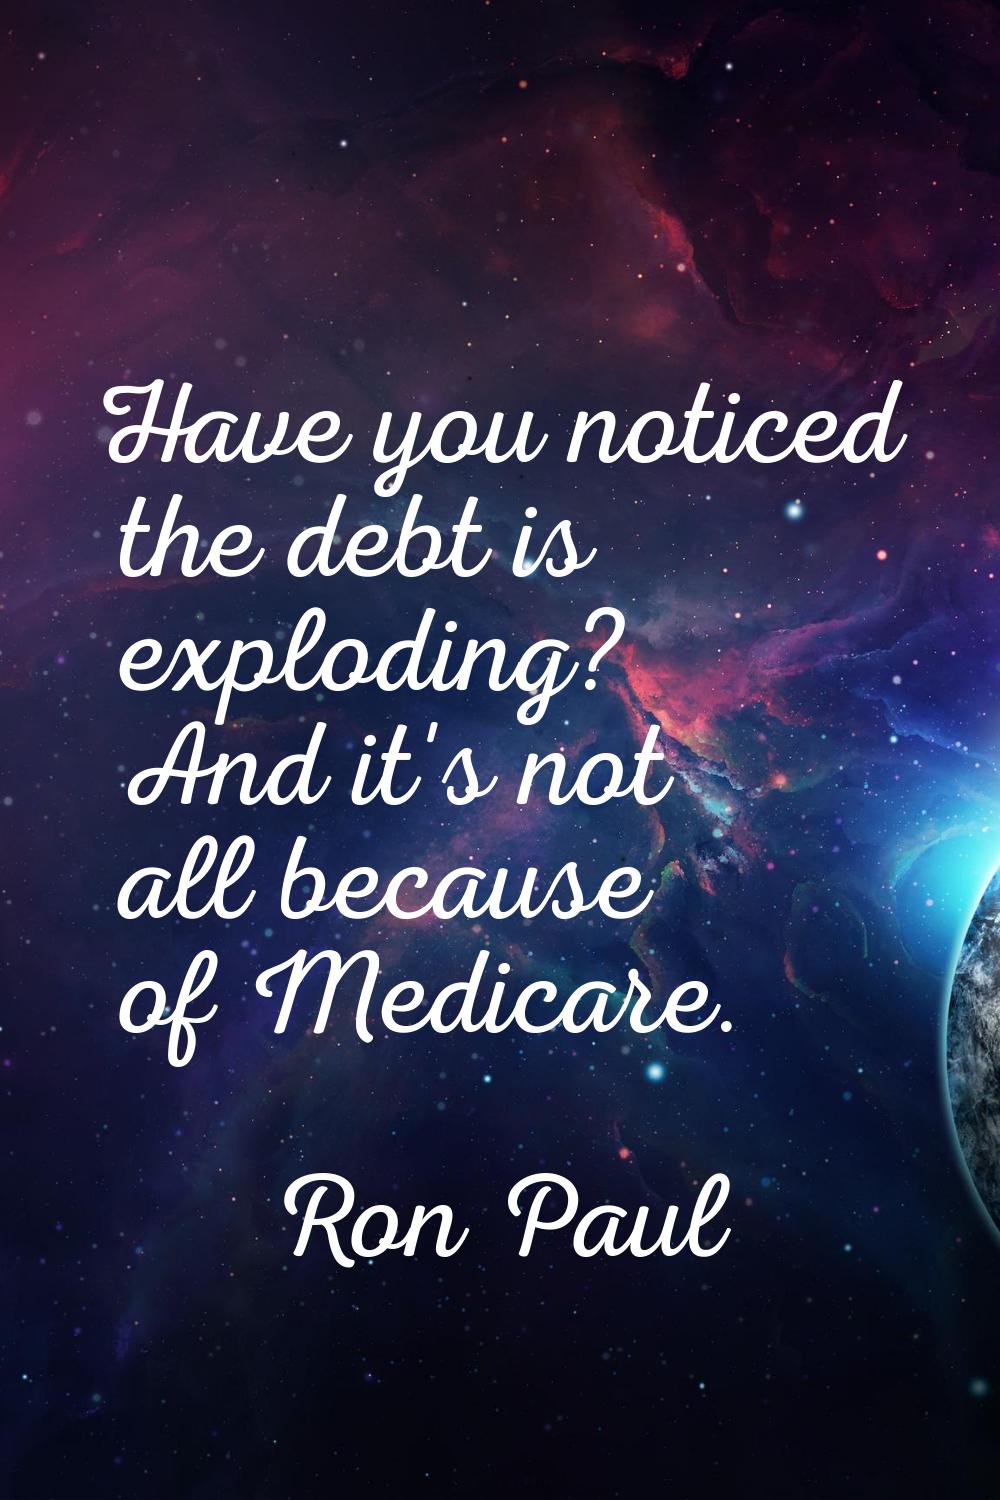 Have you noticed the debt is exploding? And it's not all because of Medicare.